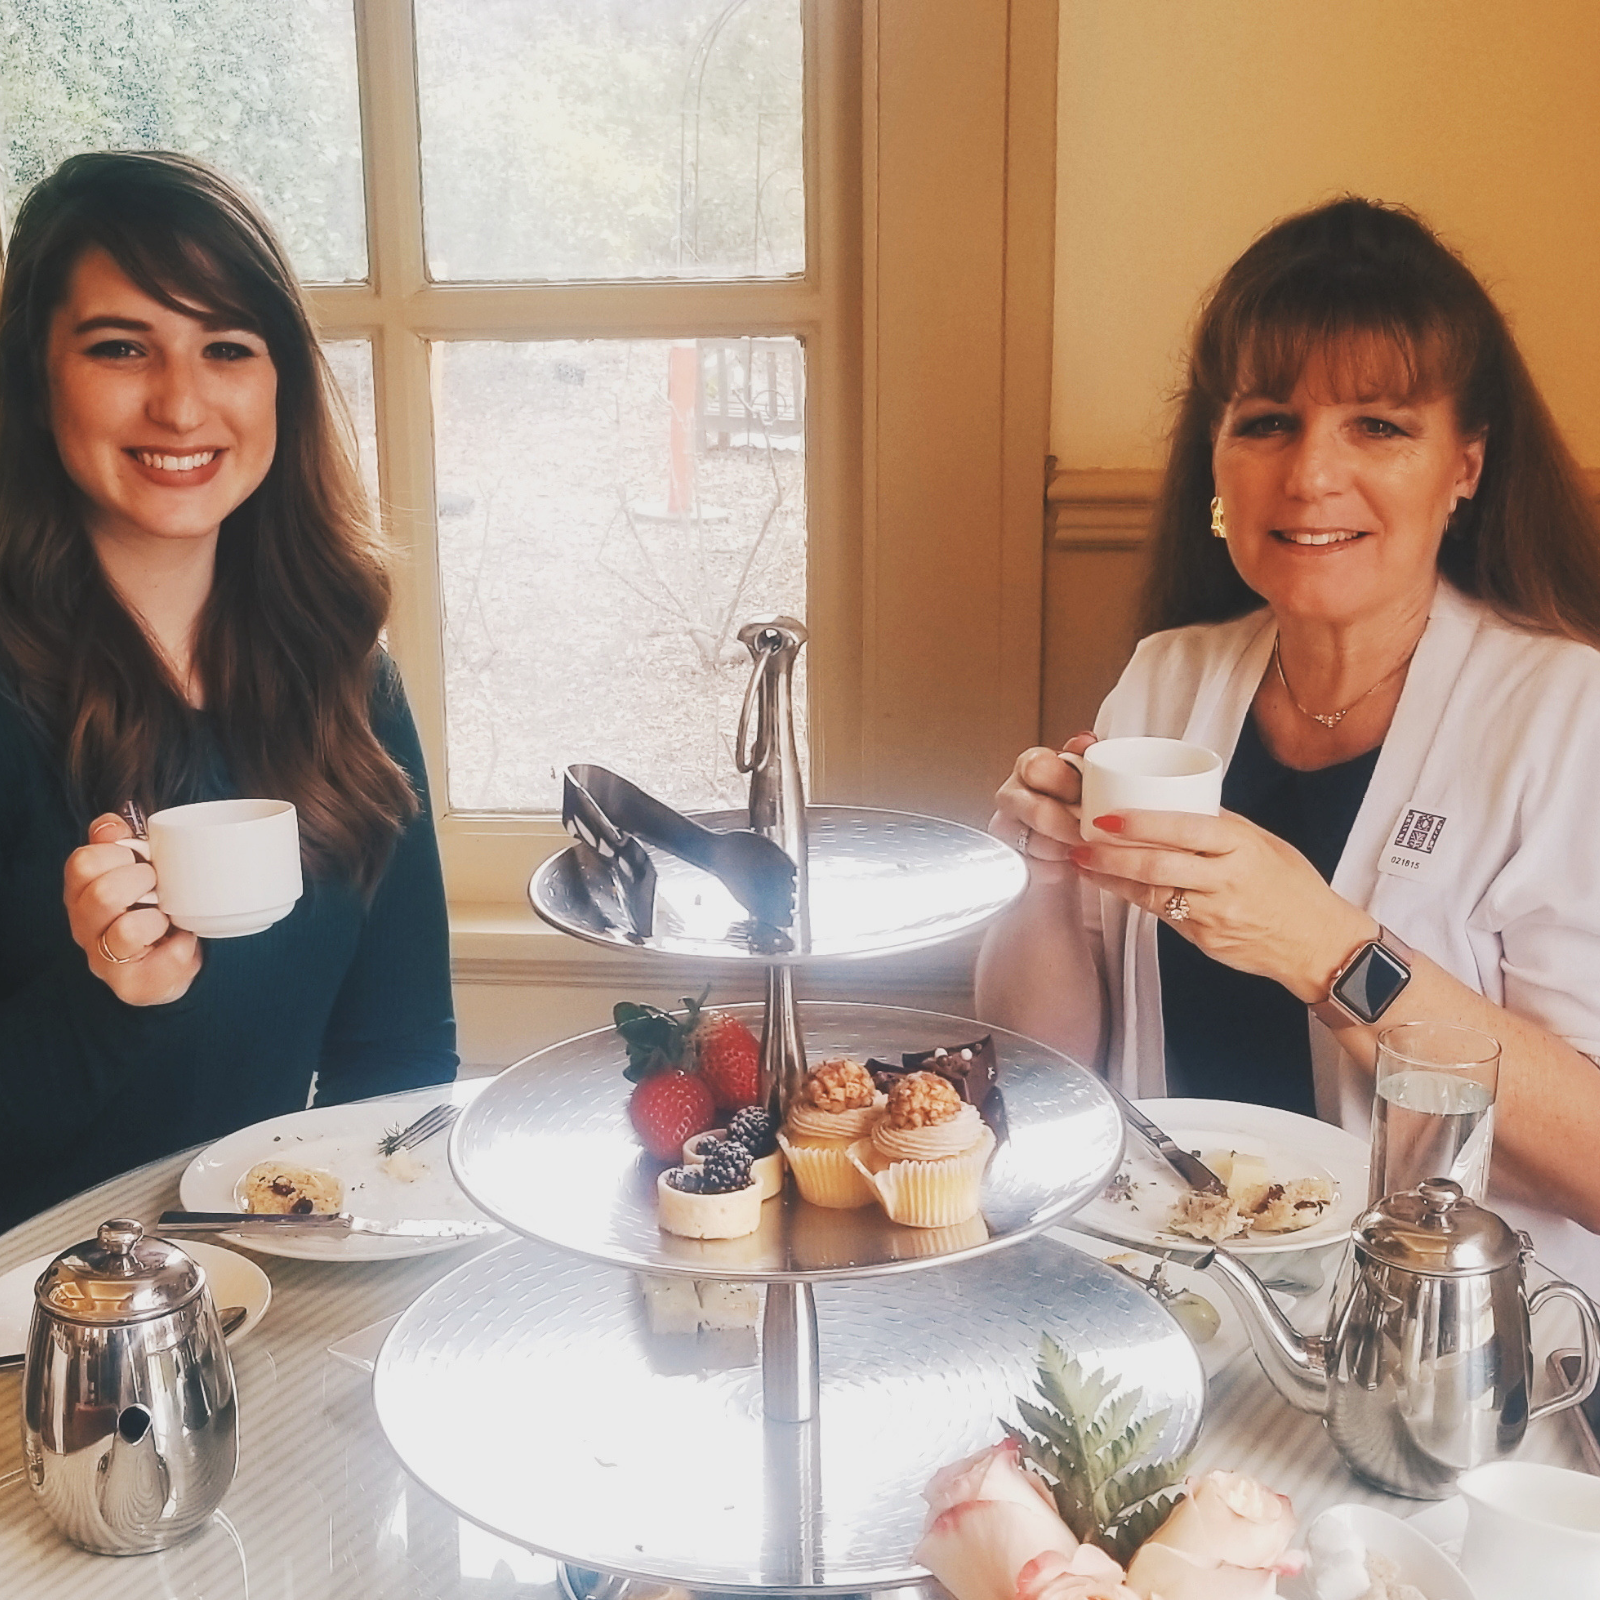 A mom and daughter smiling while sitting at a table, holding tea